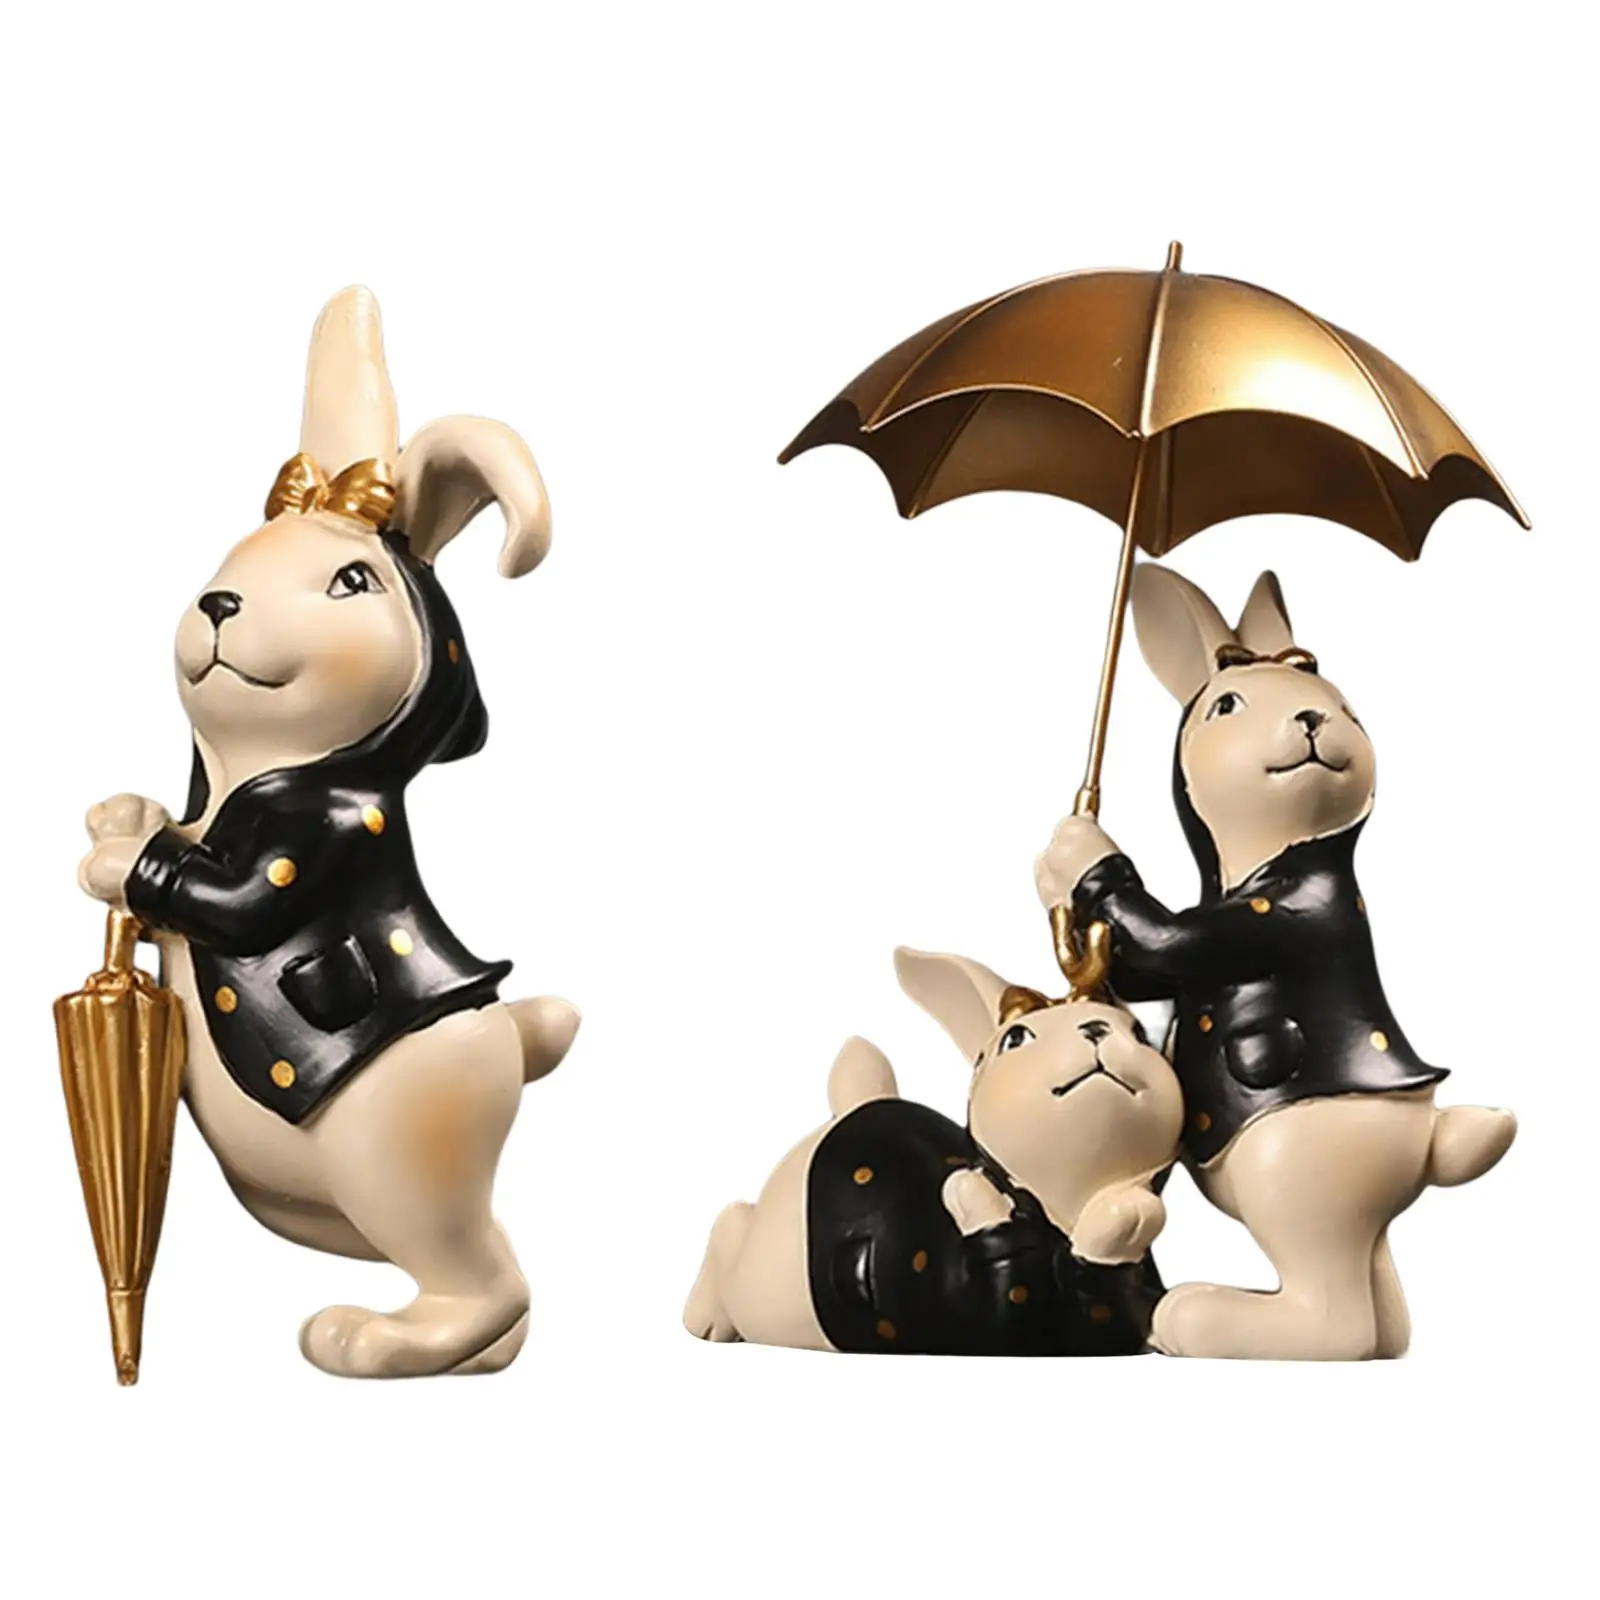 Desktop Ornaments Bunny Model Desktop  Luxury Cute Gifts Statue Craft Decoration for Wedding Home ,Christmas ,Office 